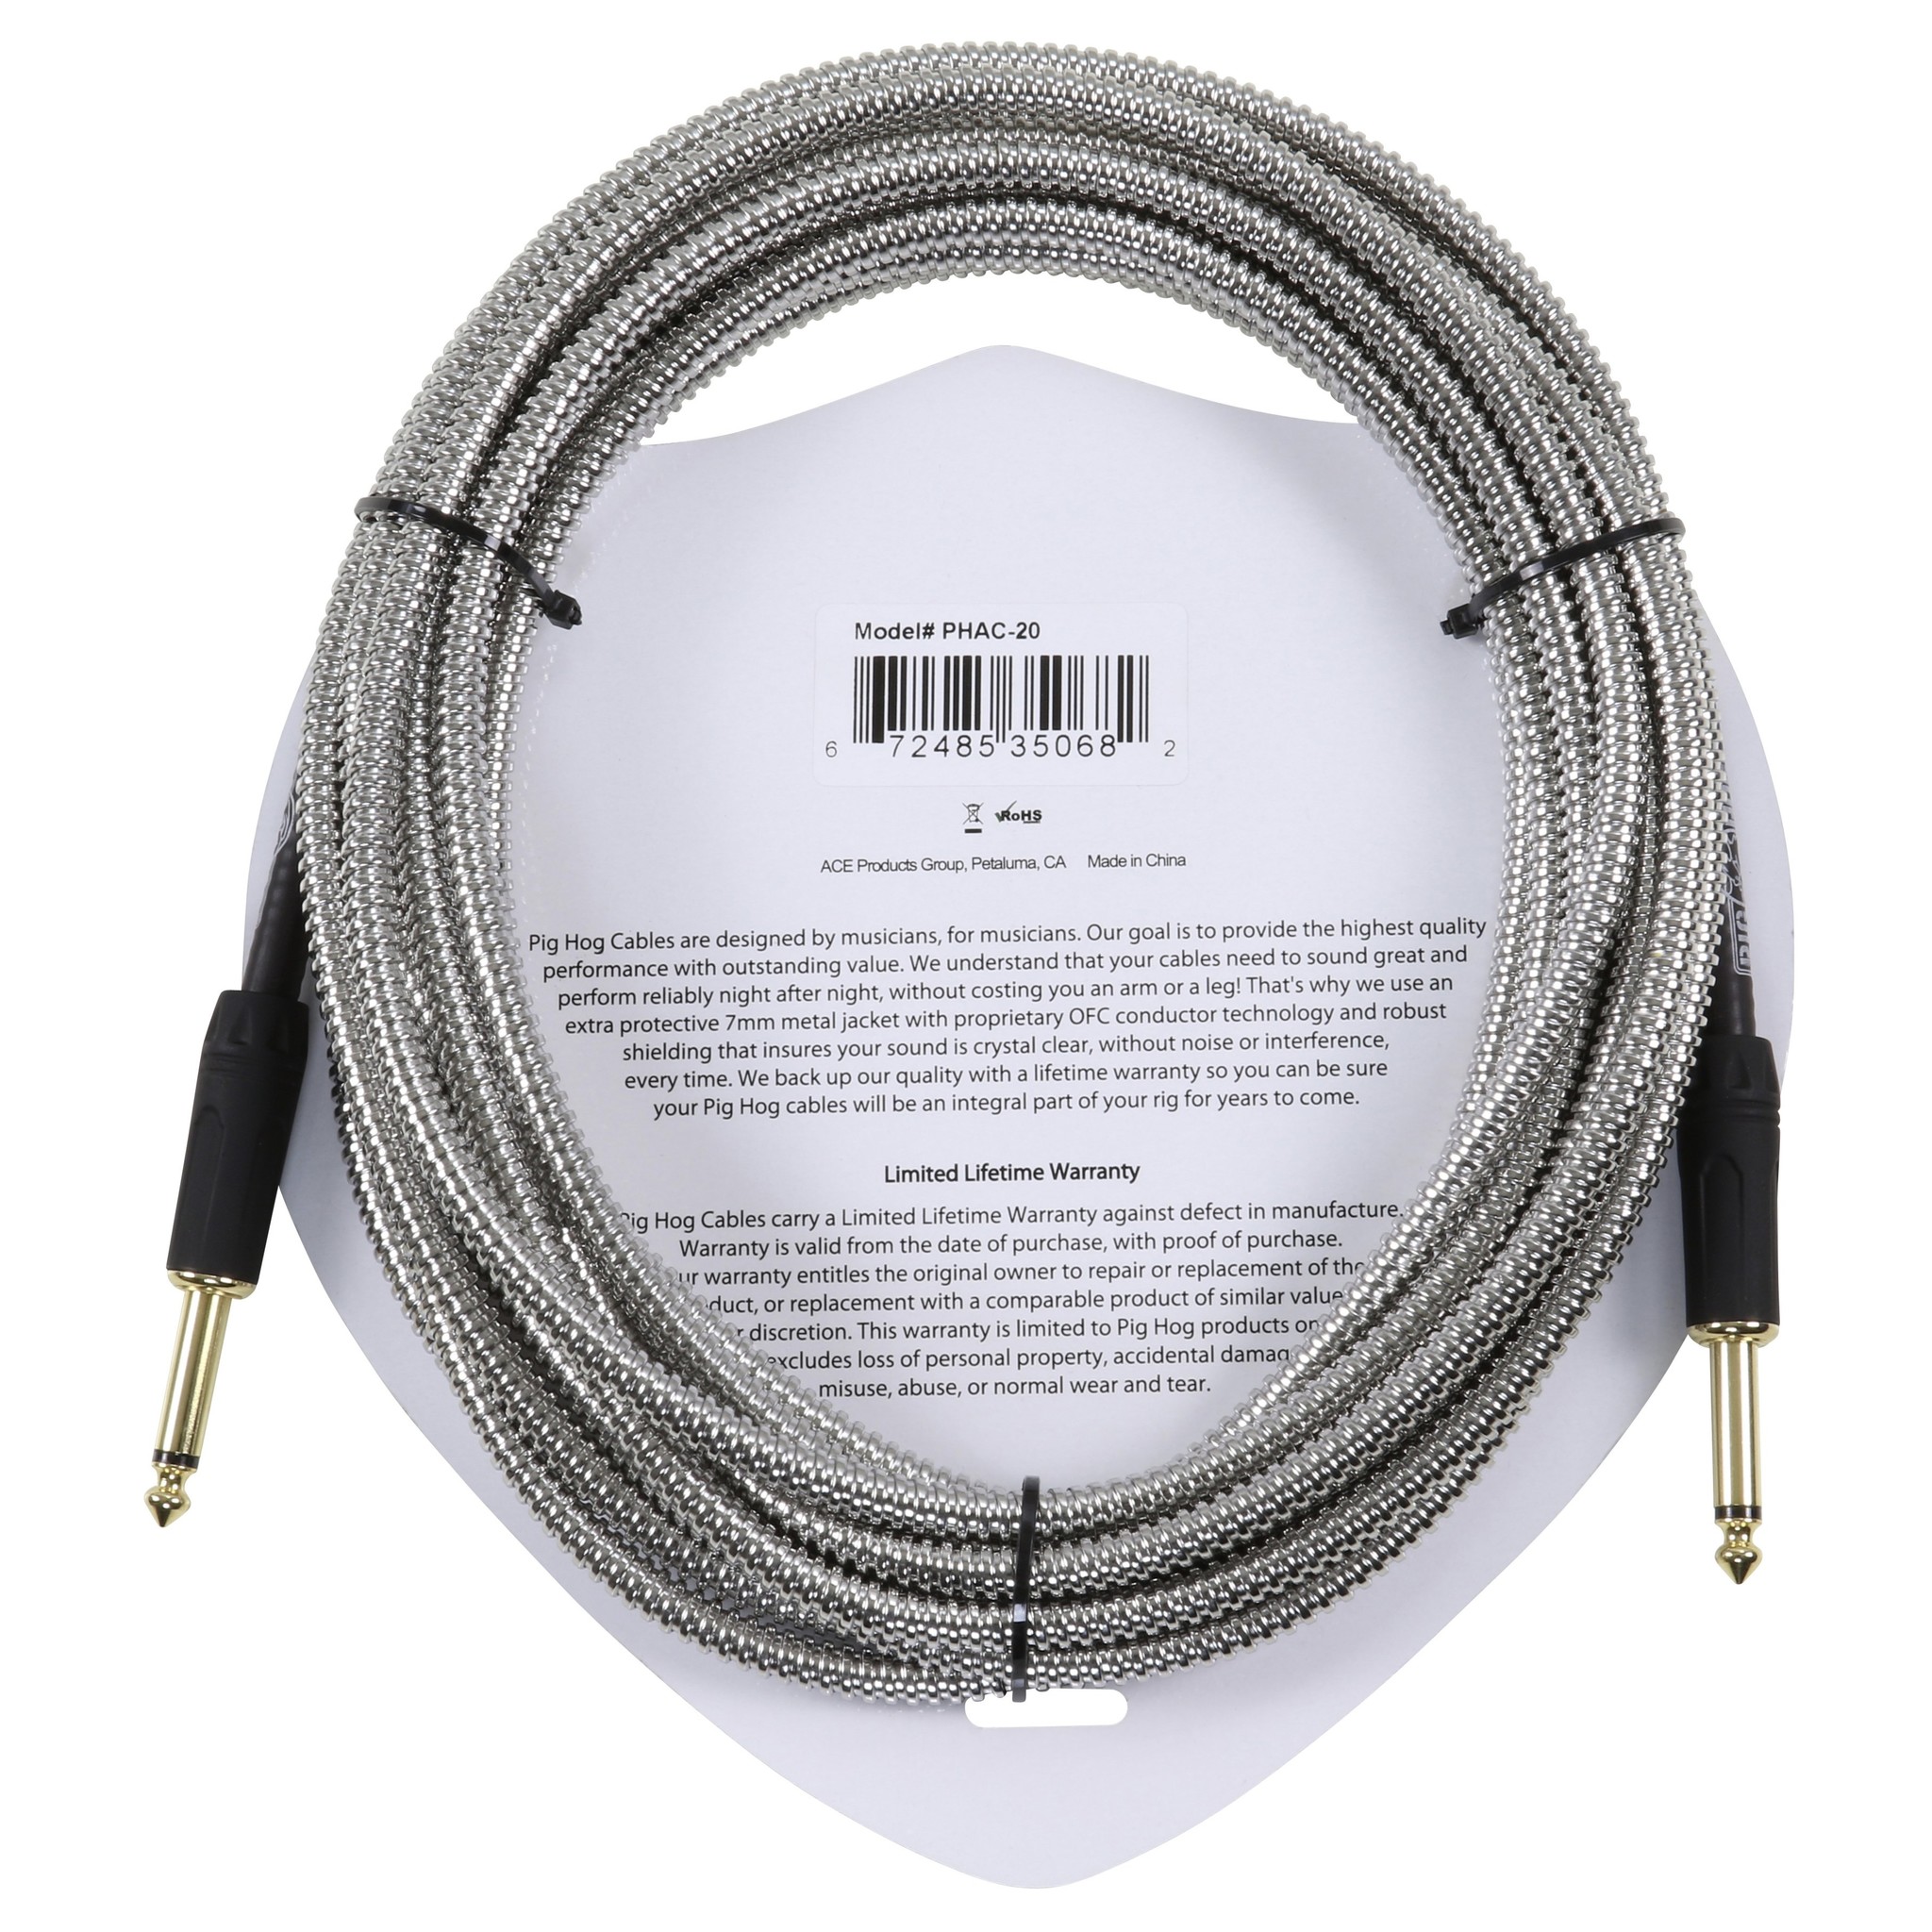 Pig Hog "Armor Clad" Instrument Cable, 20 ft Industrial Metal Conduit-Style